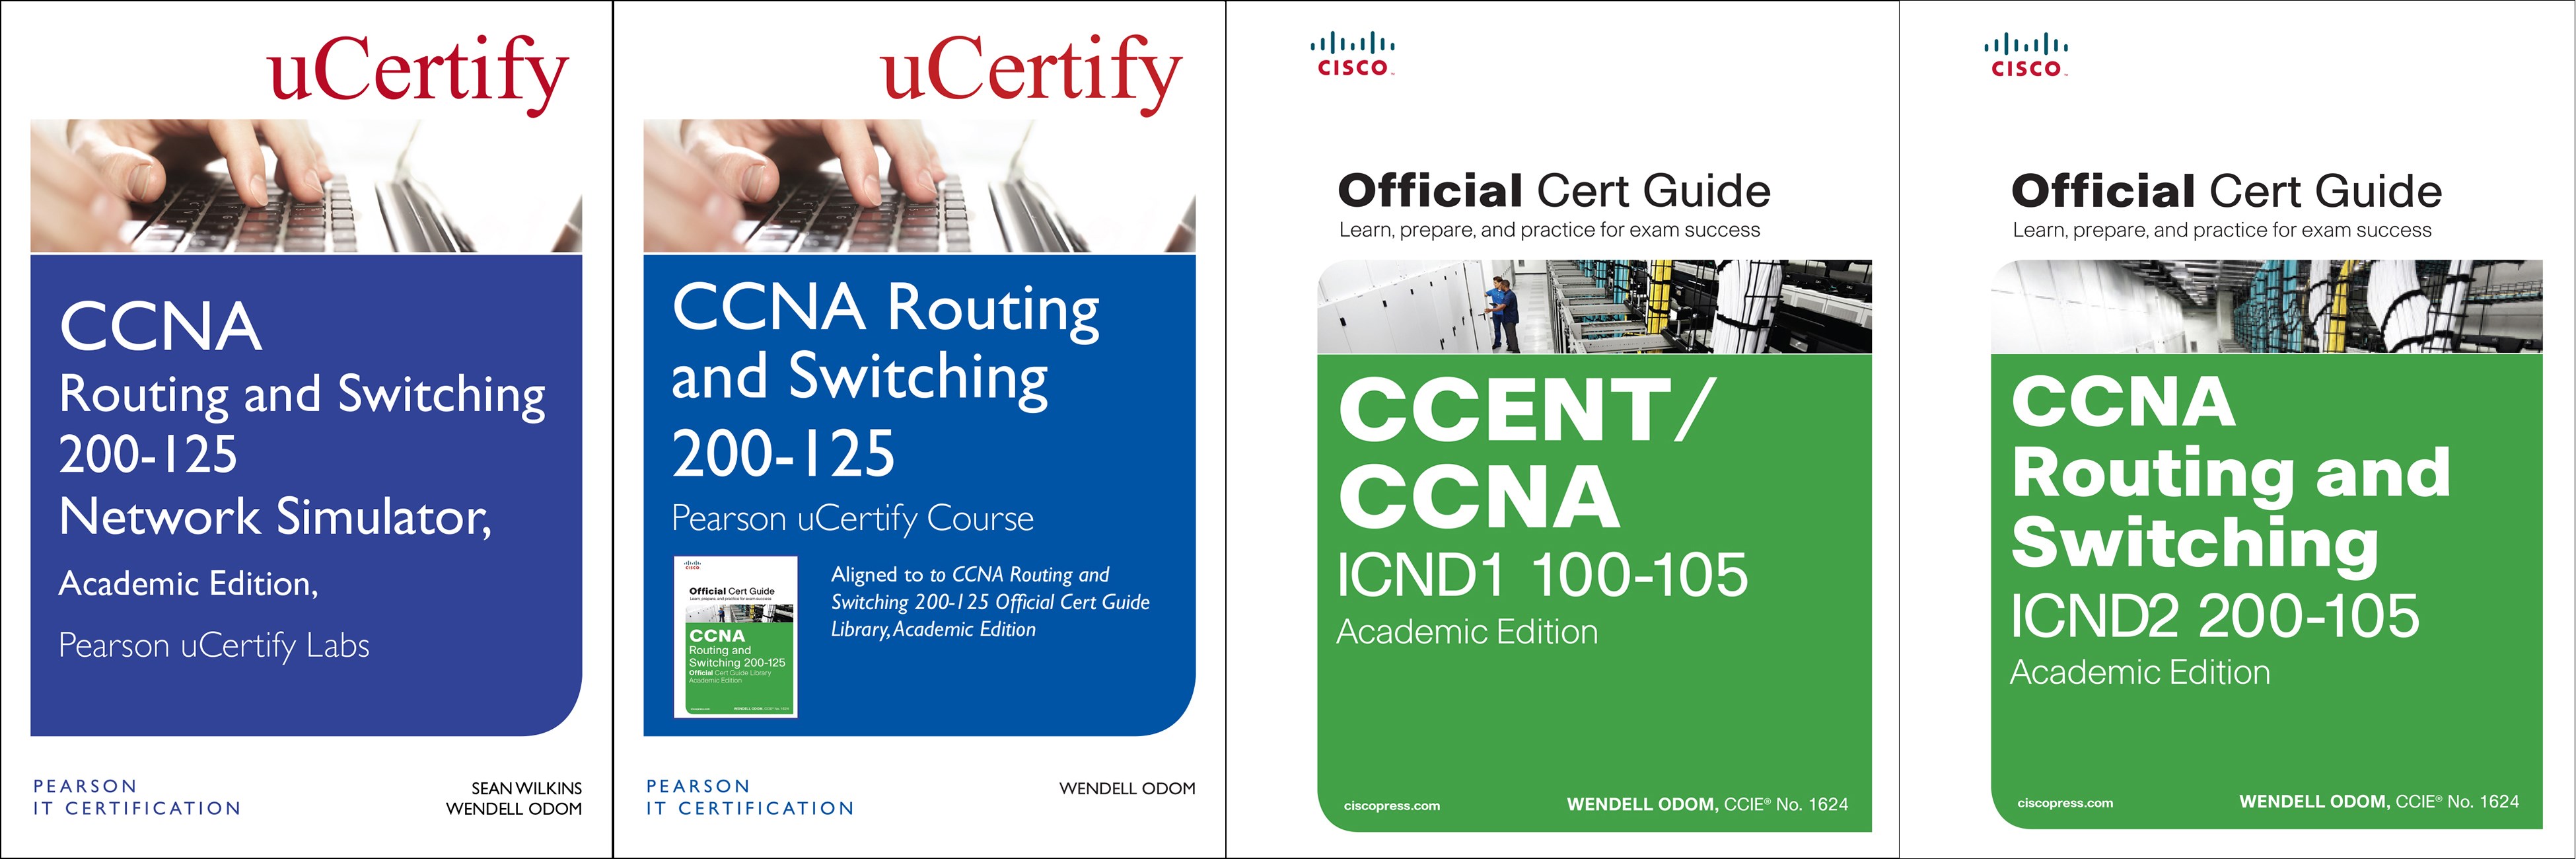 ccna-routing-and-switching-200-125-pearson-ucertify-course-network-simulator-and-textbook